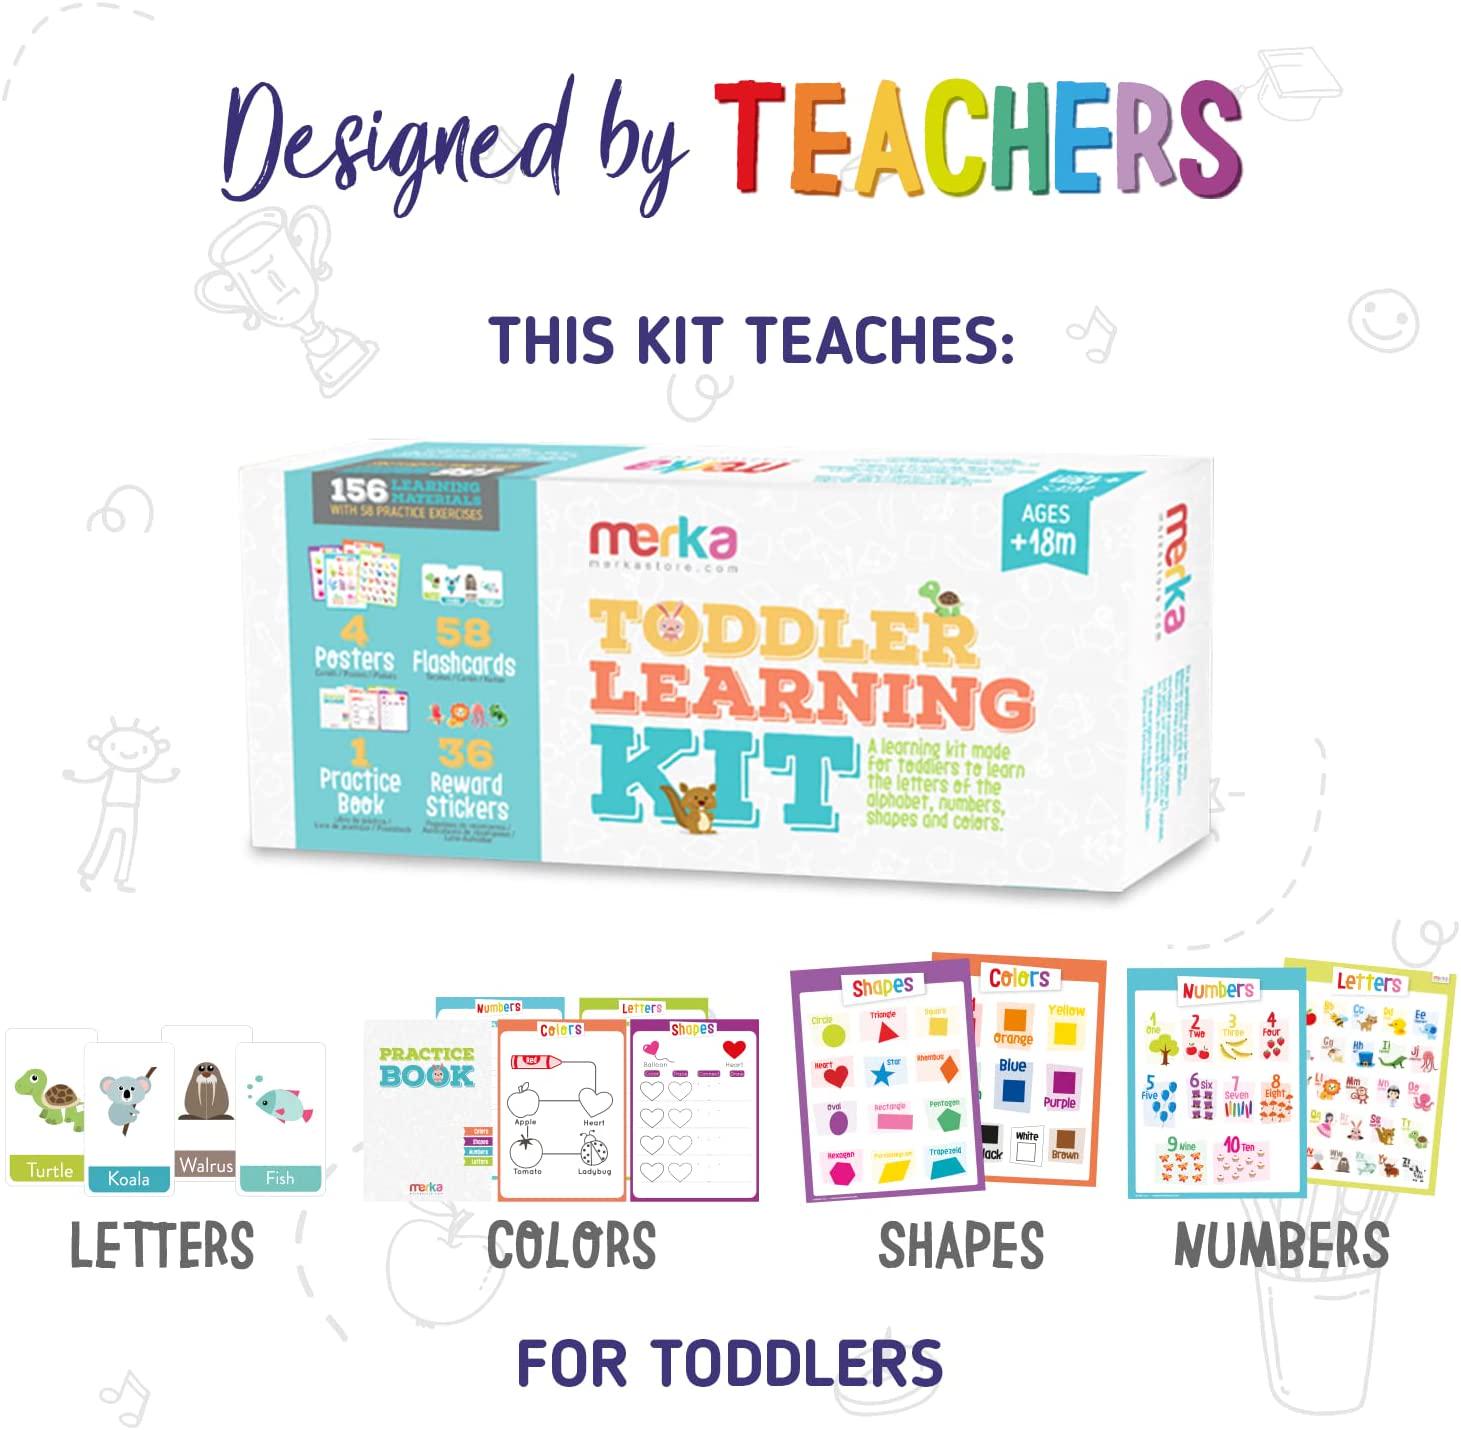 merka, merka Toddler Learning Kit - Includes 4 Posters, 58 Flashcards, 58 Practice Book Exercises and 36 Reward Stickers - Learn Letters, Colors, Shapes and Numbers - Prek and K